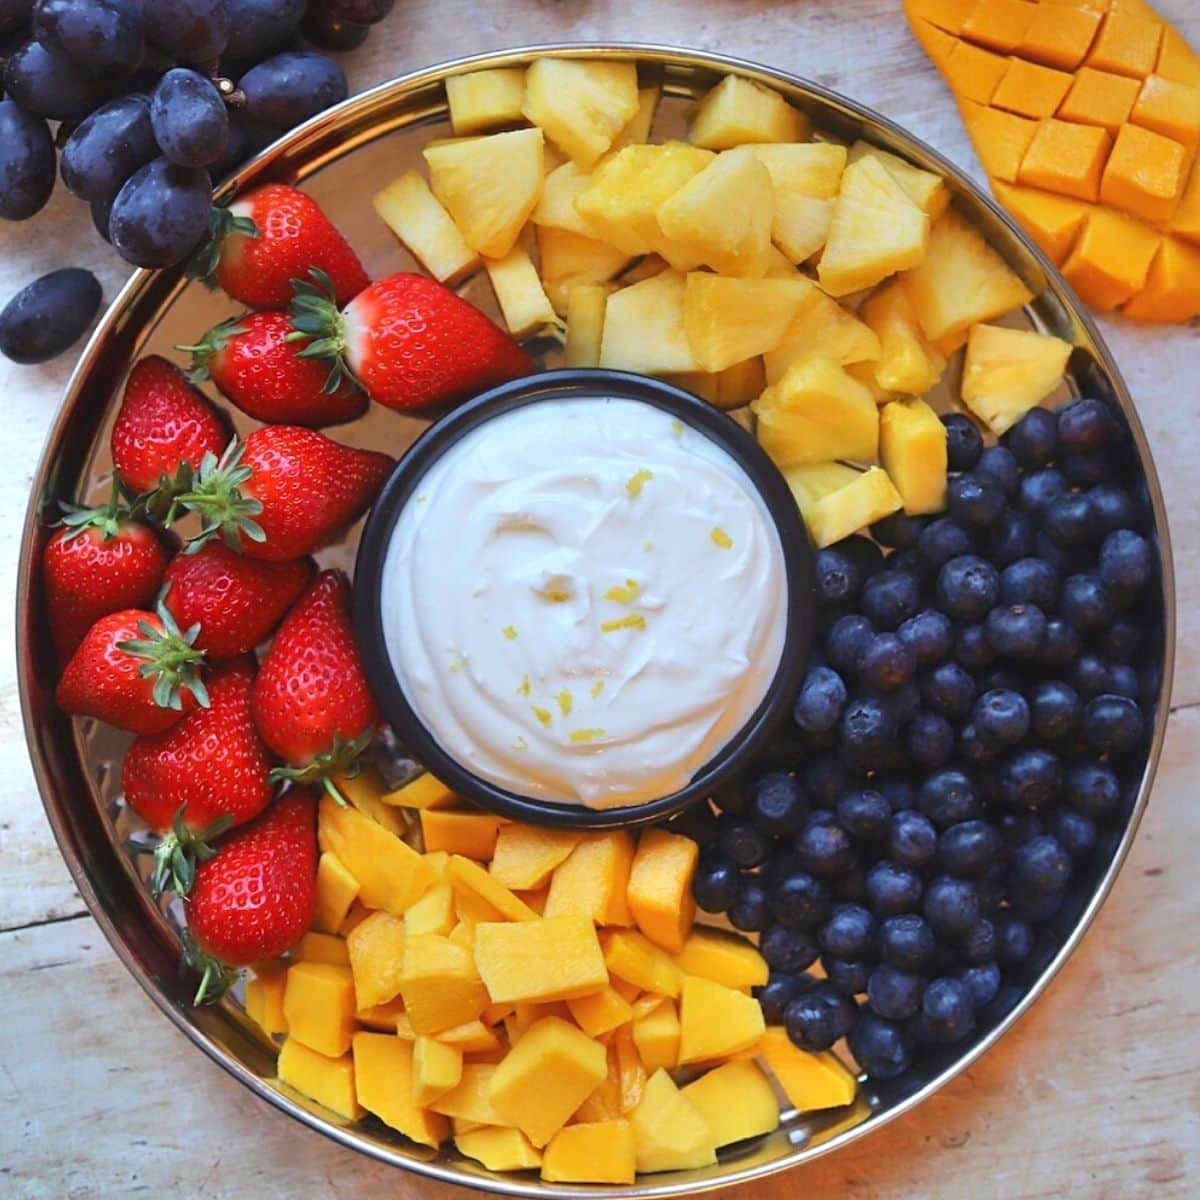 Fruit platter with small bowl of sweet lemon yogurt dip in the middle